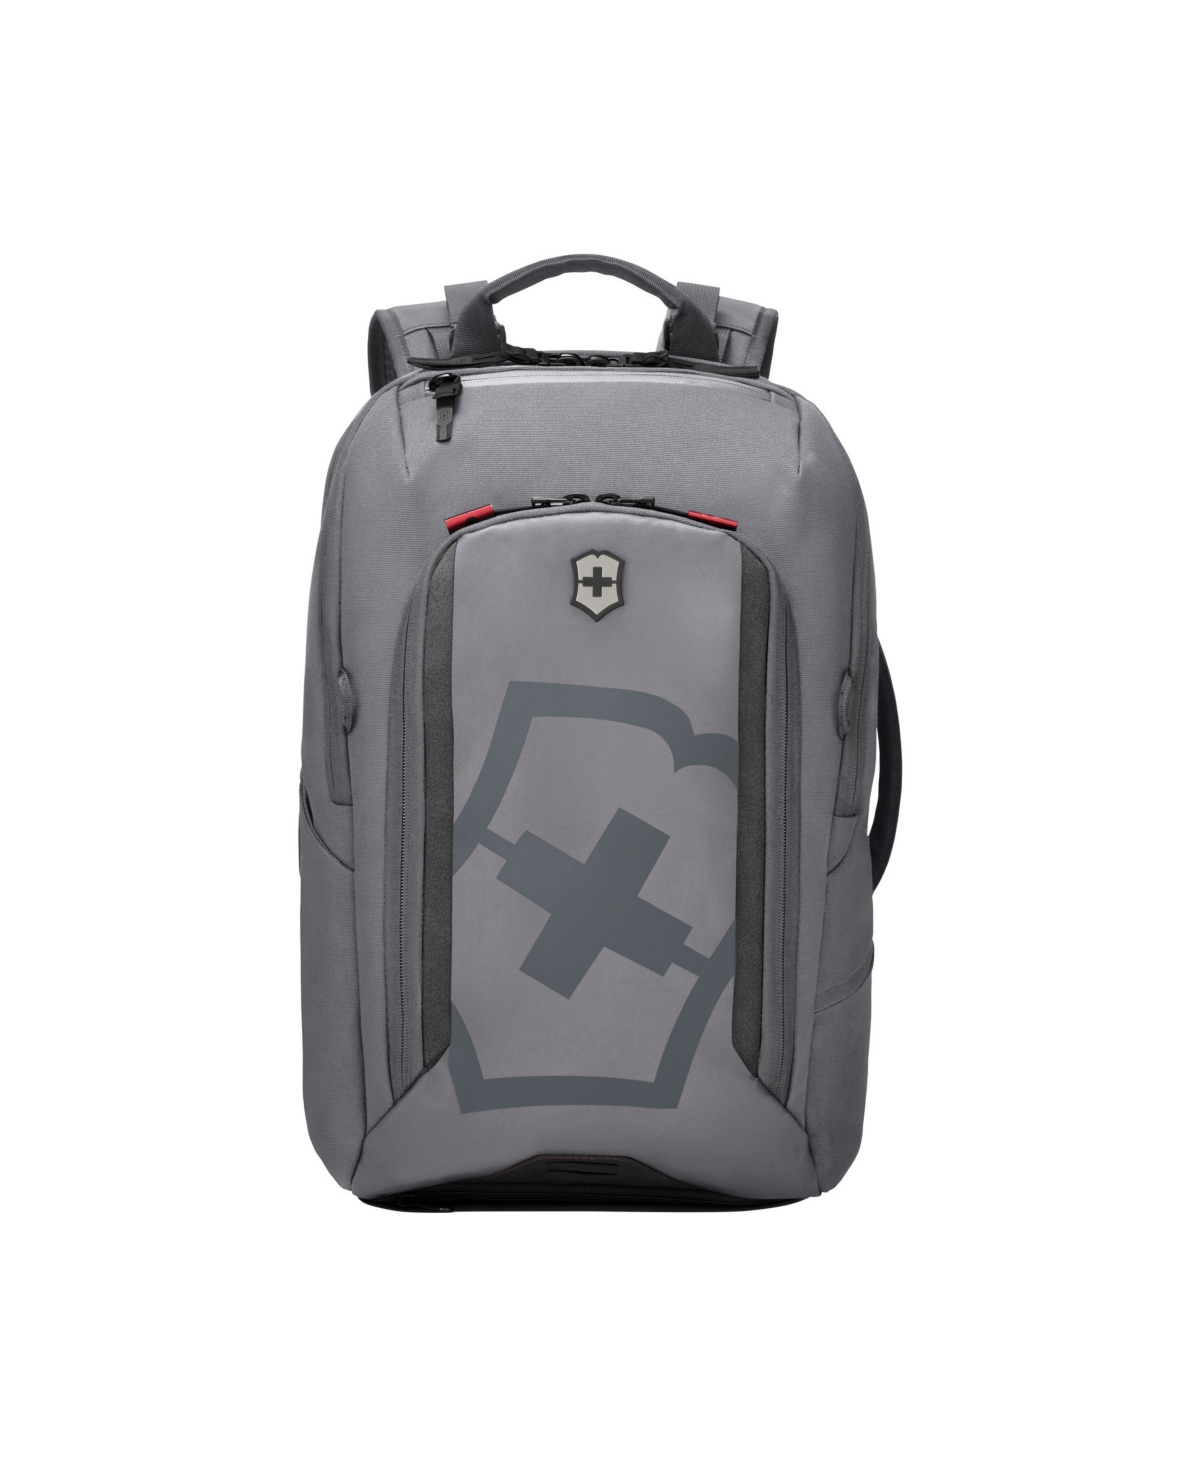 Touring 2.0 Commuter 15" Laptop Backpack - Gray